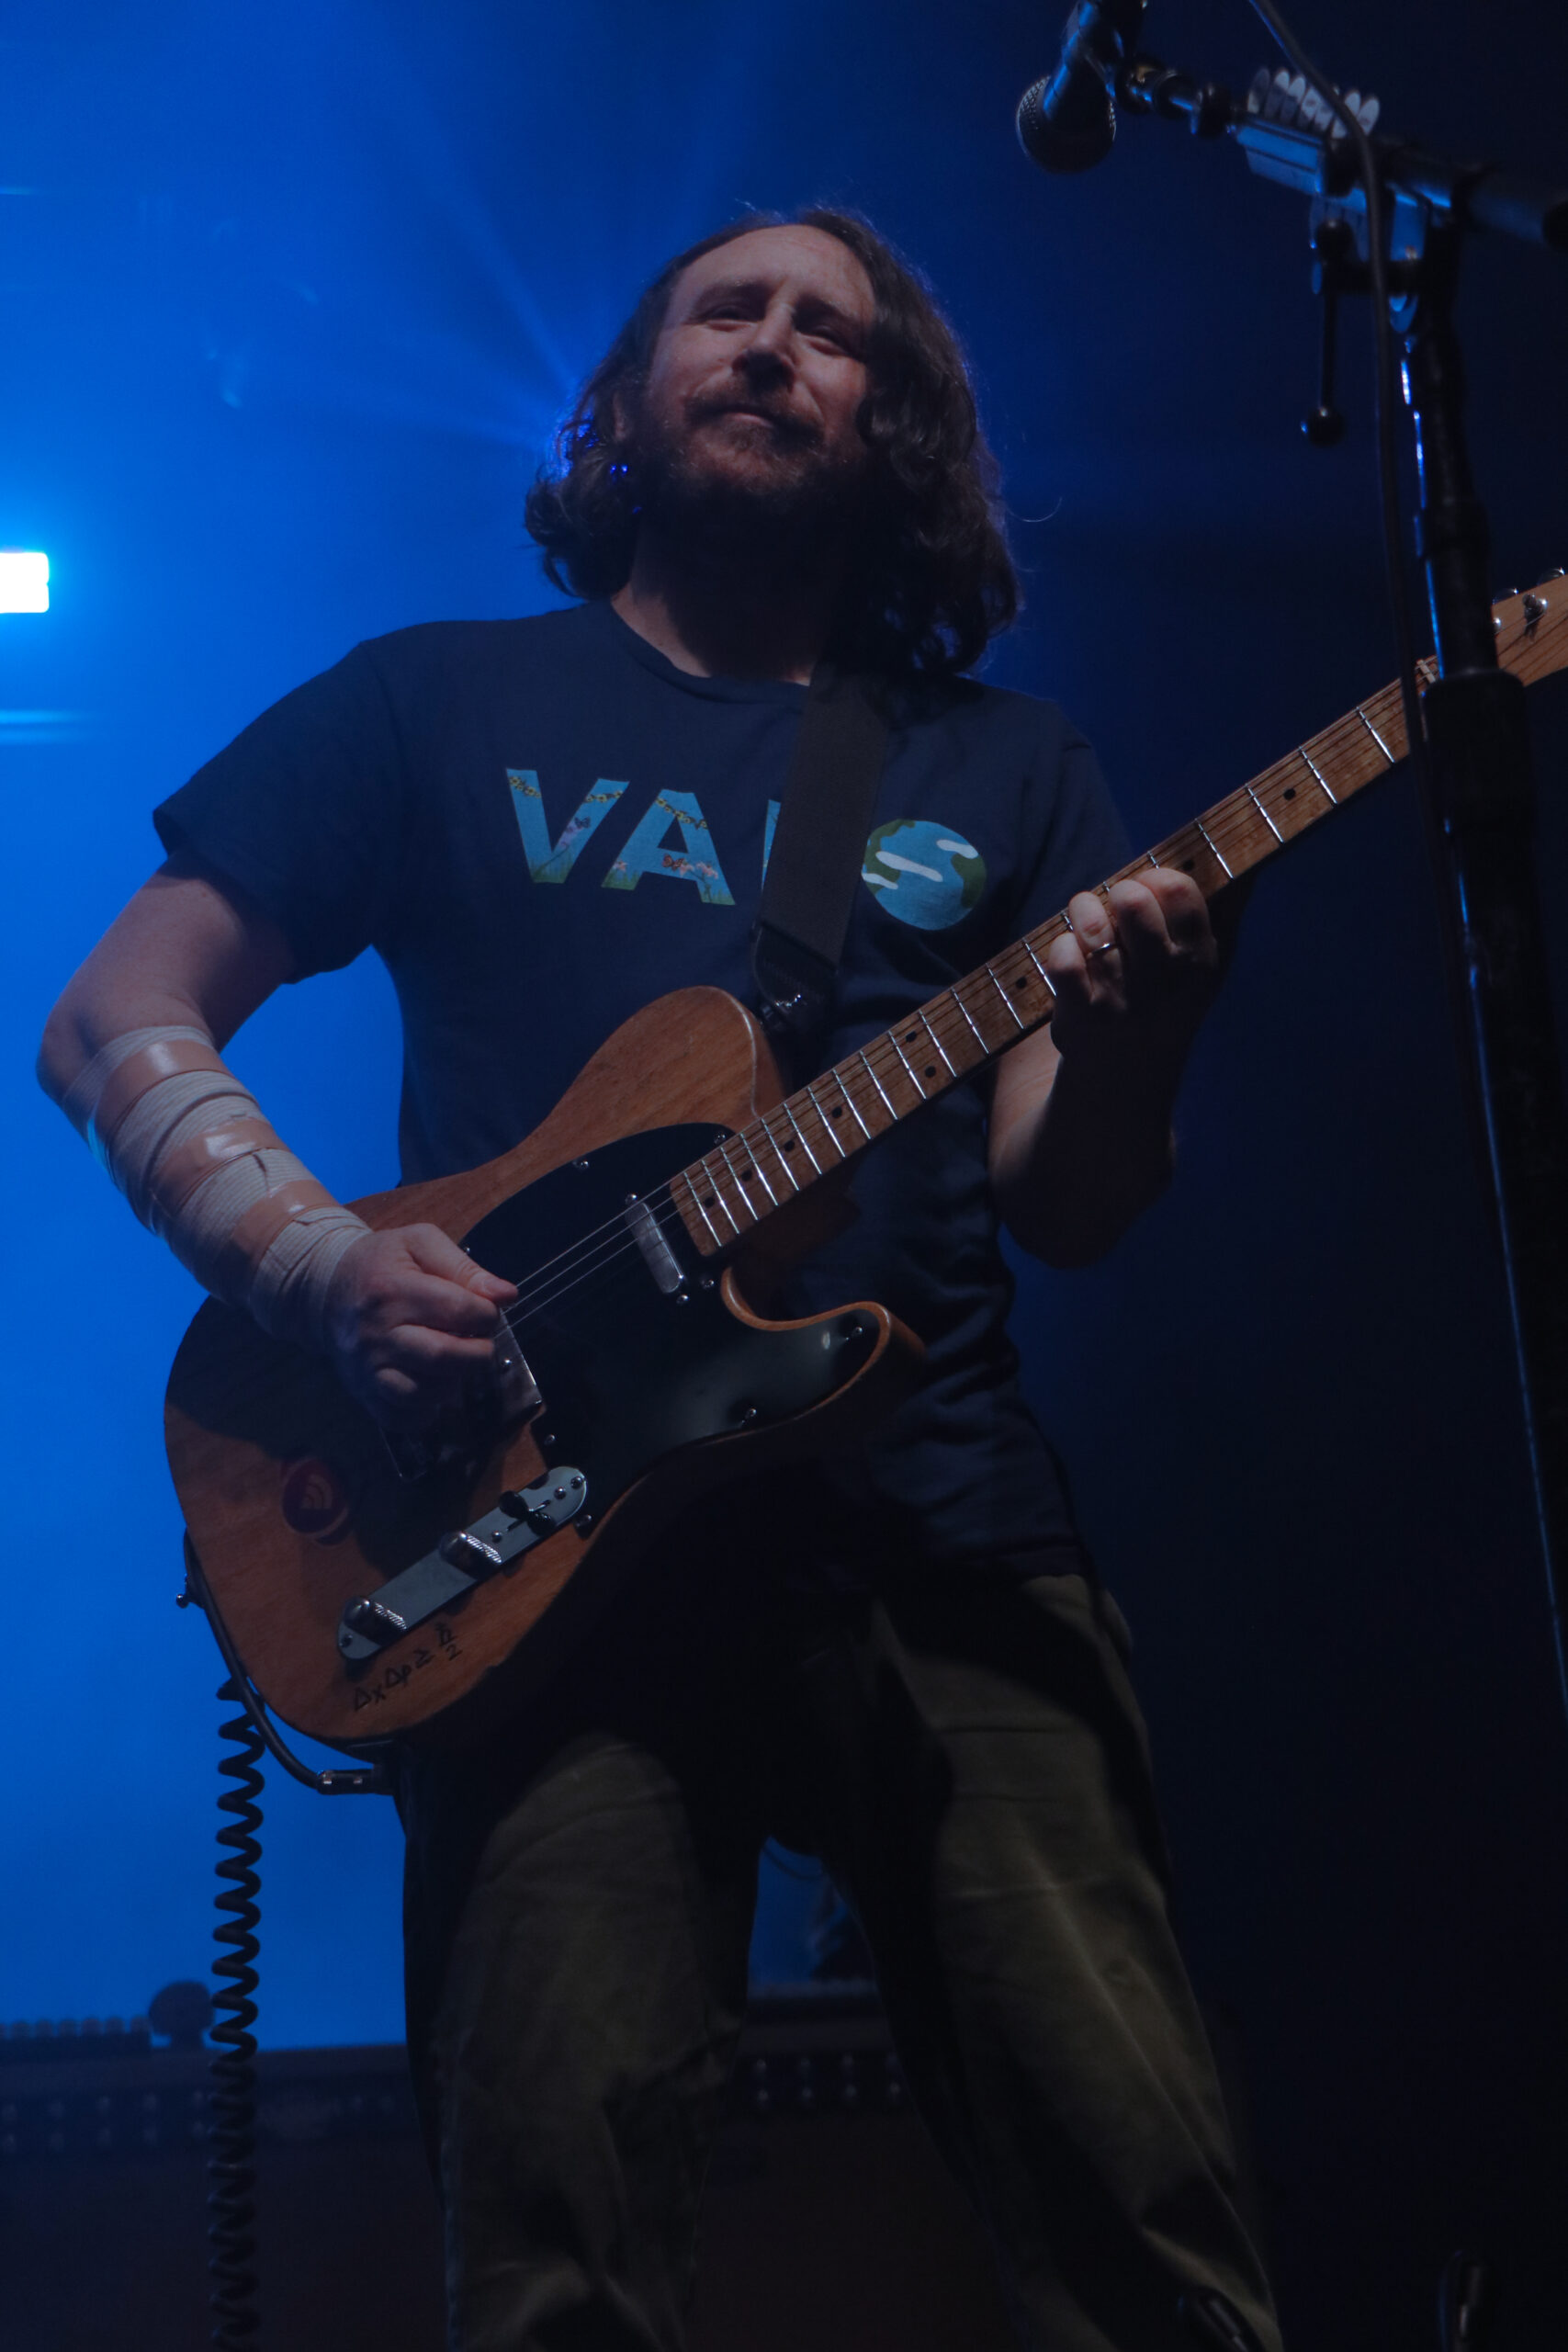 Incubus's guitarist Mike Einziger playing to the crowd